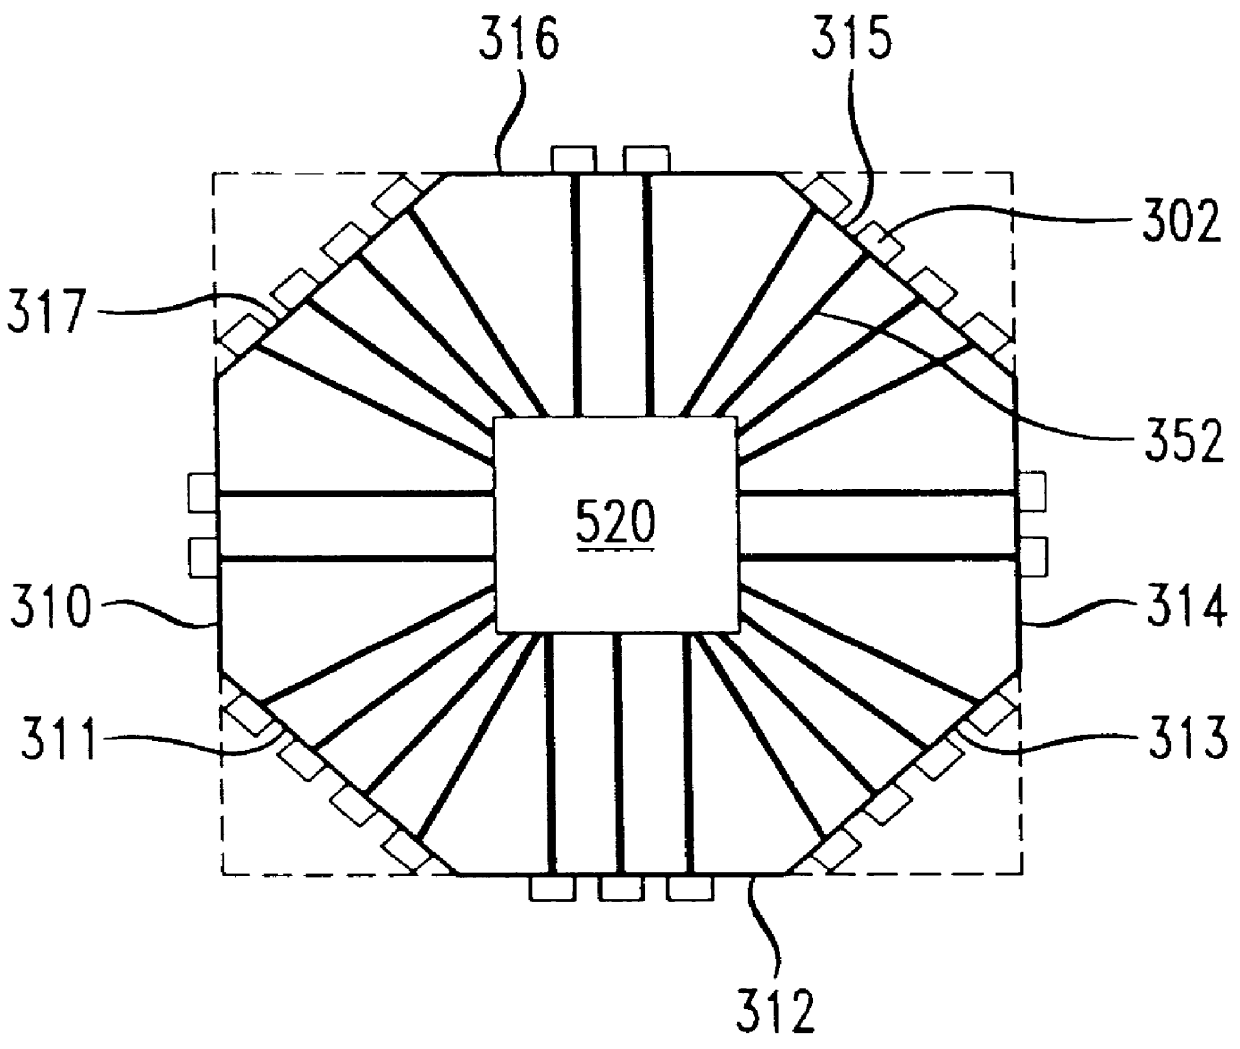 Integrated circuit having reduced probability of wire-bond failure